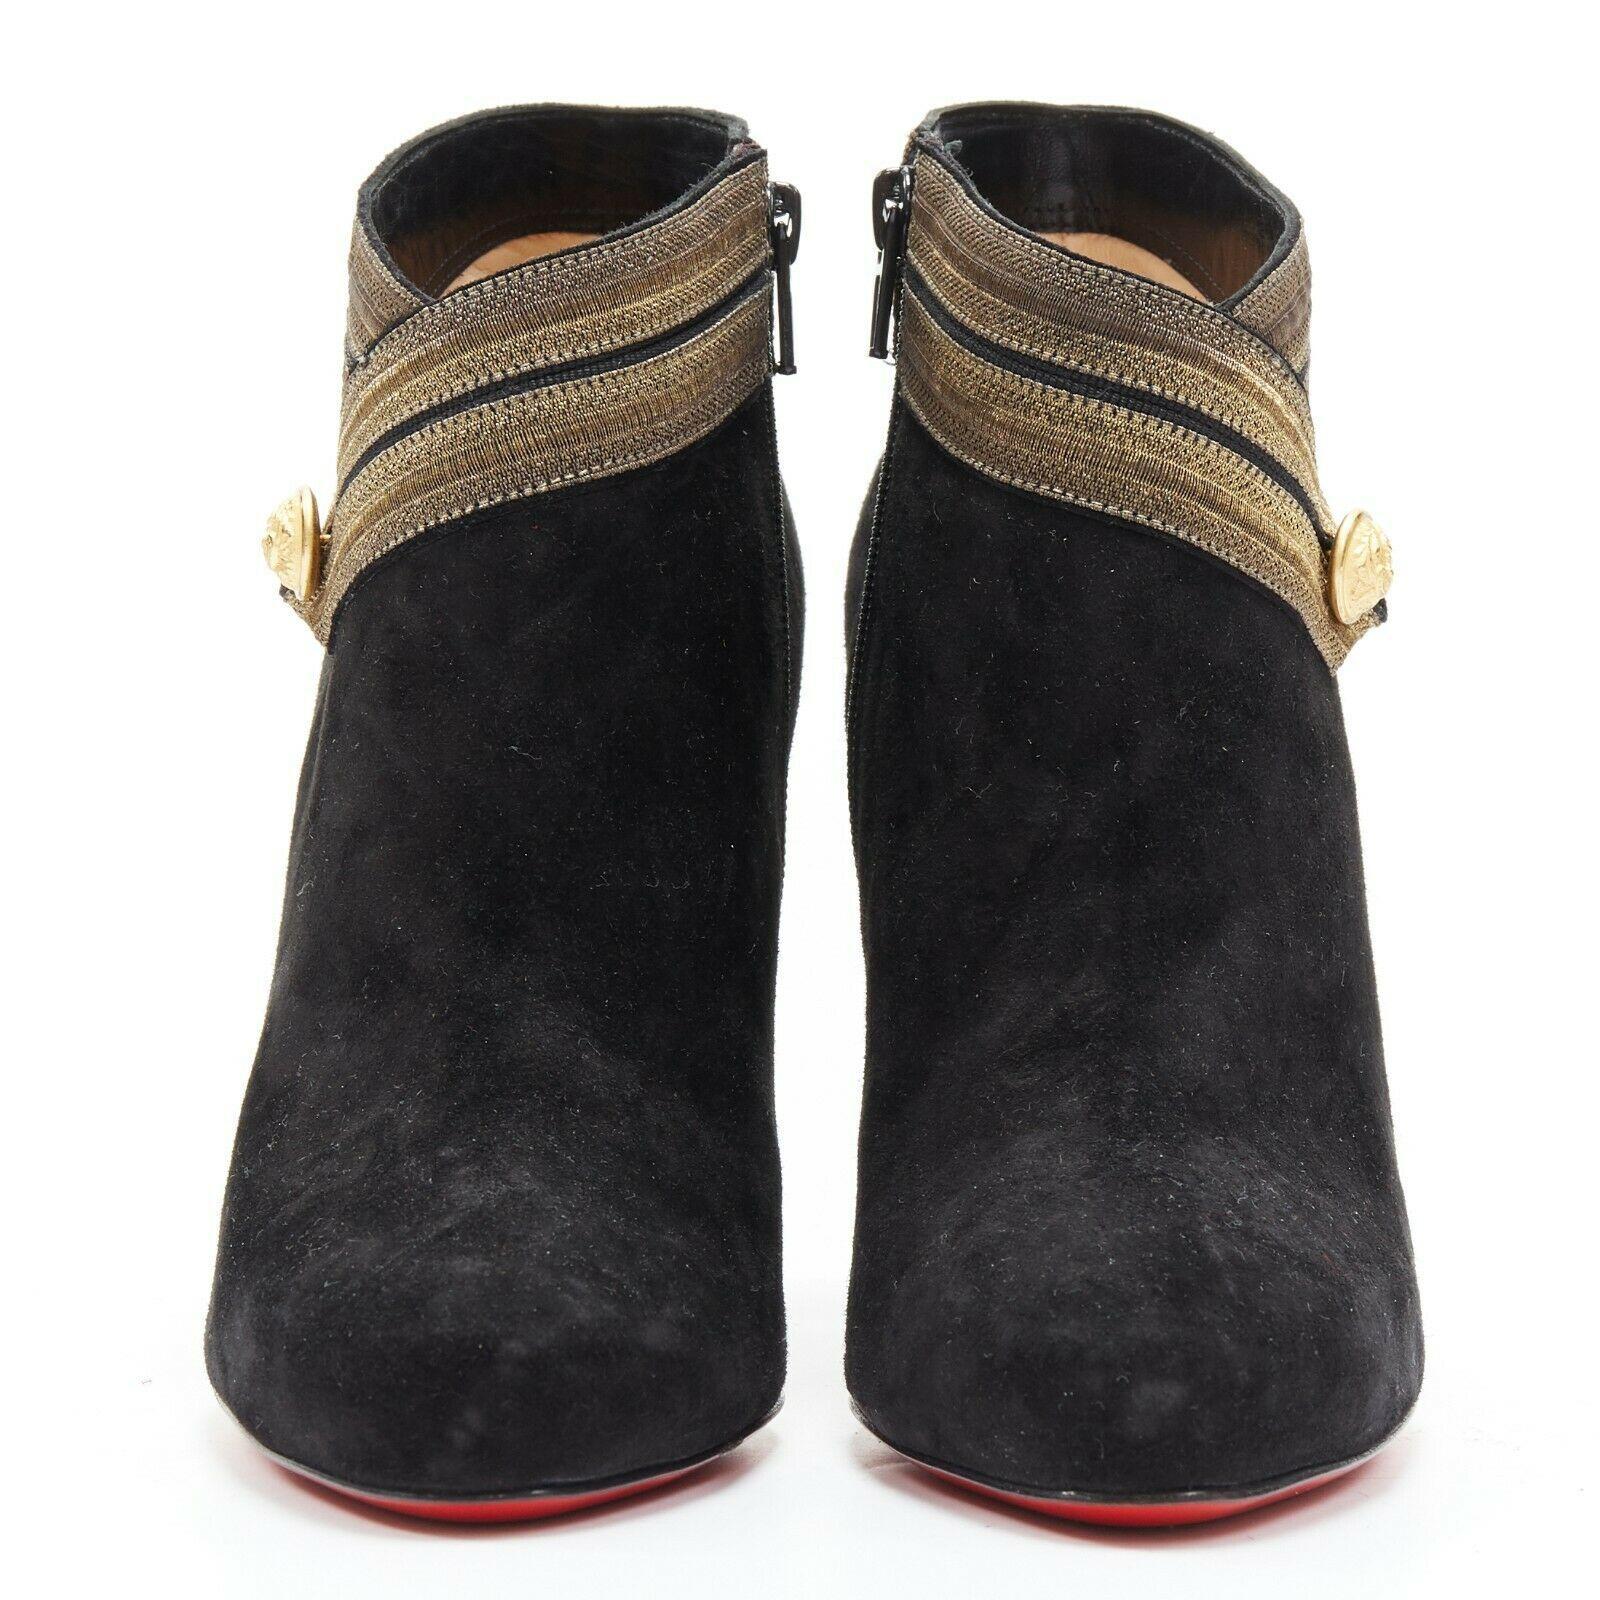 Black new CHRISTIAN LOUBOUTIN Marychal 100 black suede gold military trim bootie EU38